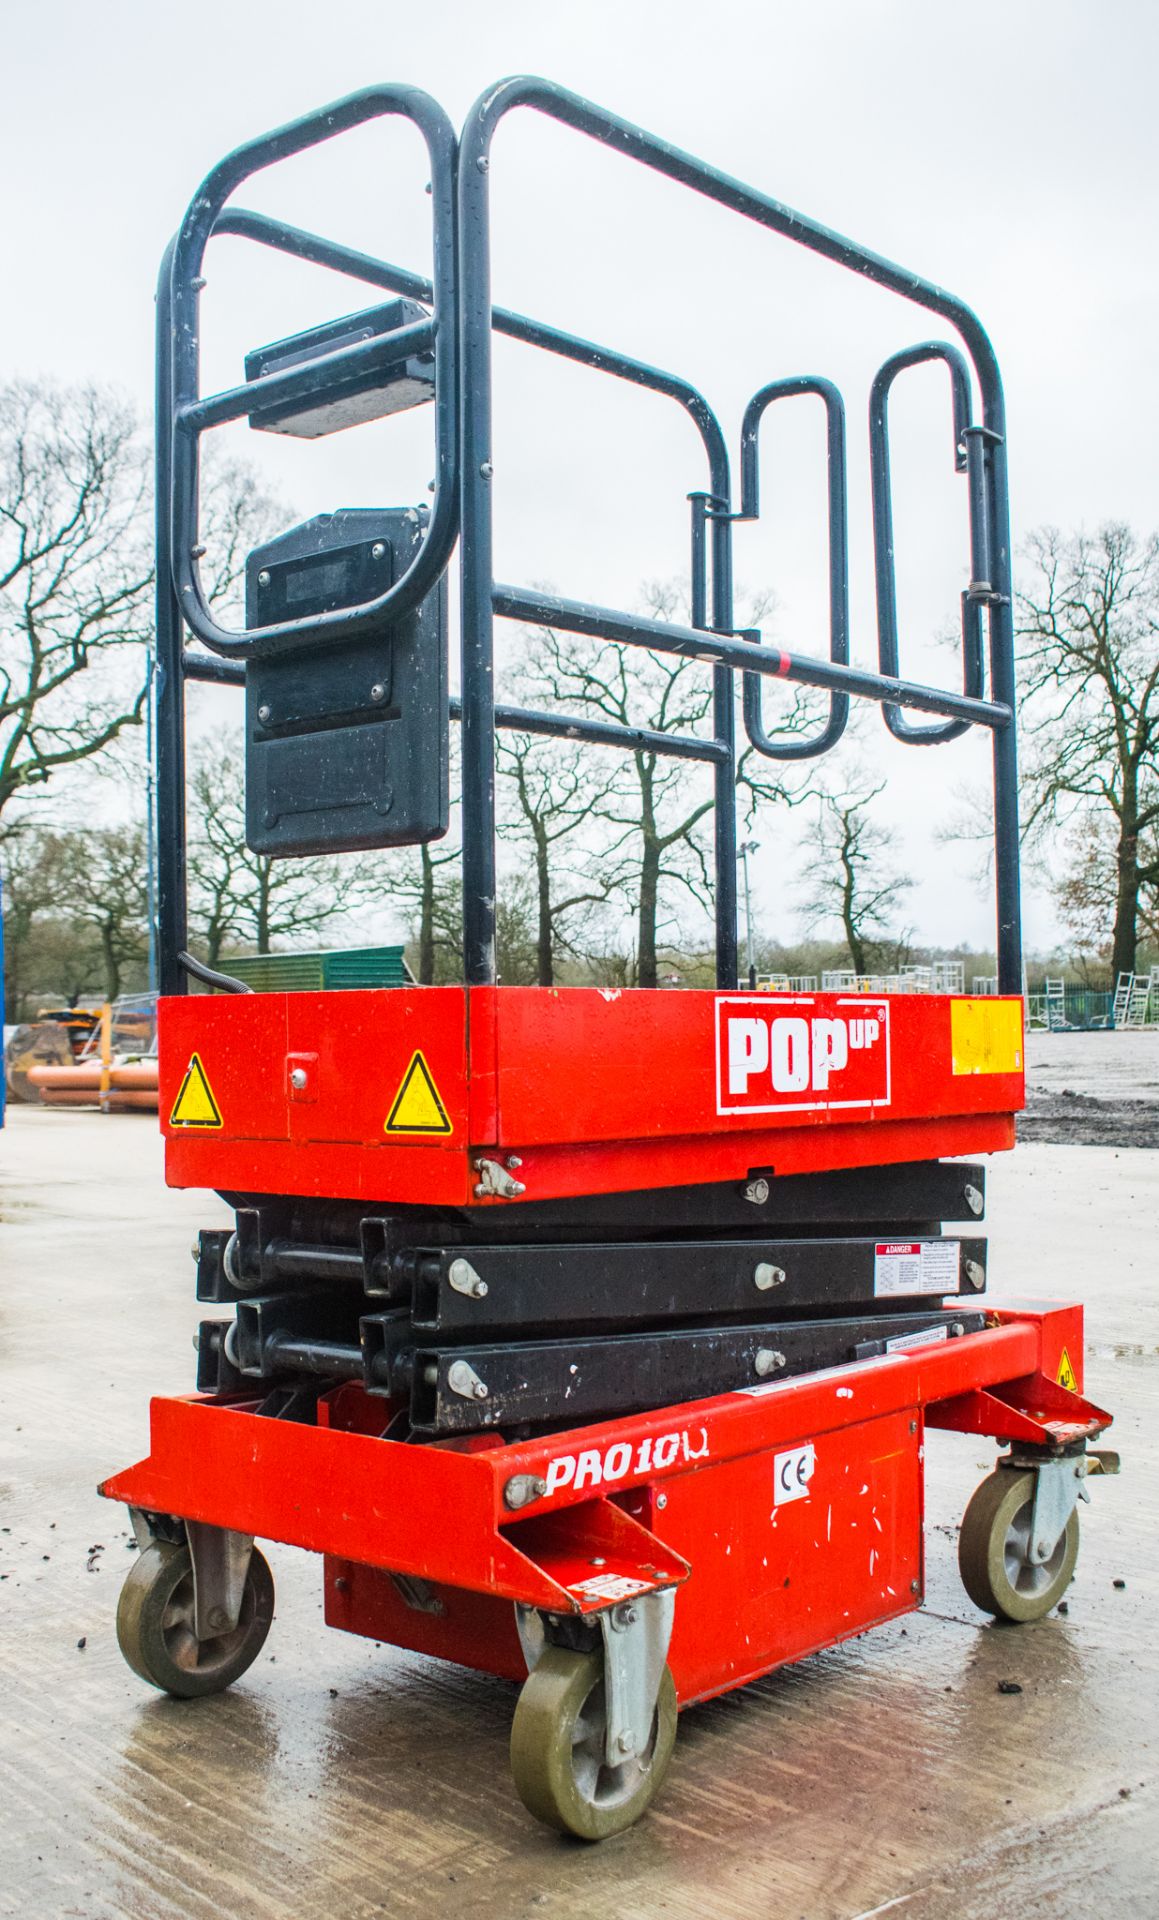 Pop-up PRO 10 iQ battery electric push around scissor lift  Year: 2016 S/N:  A740395 - Image 2 of 4